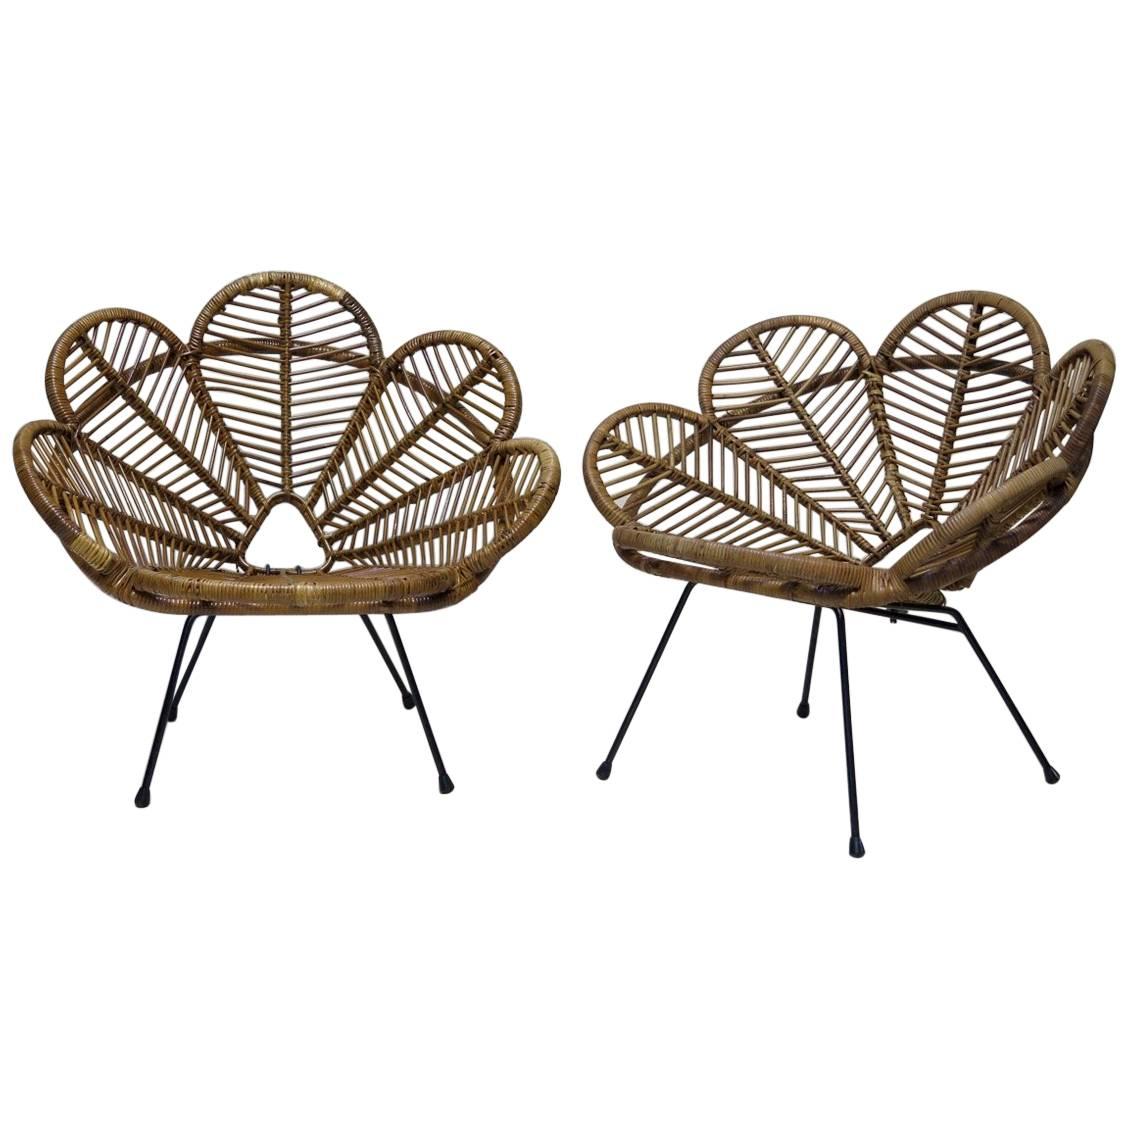 "Flower Petal" Rattan and Iron Lounge Chairs, France, 1950s